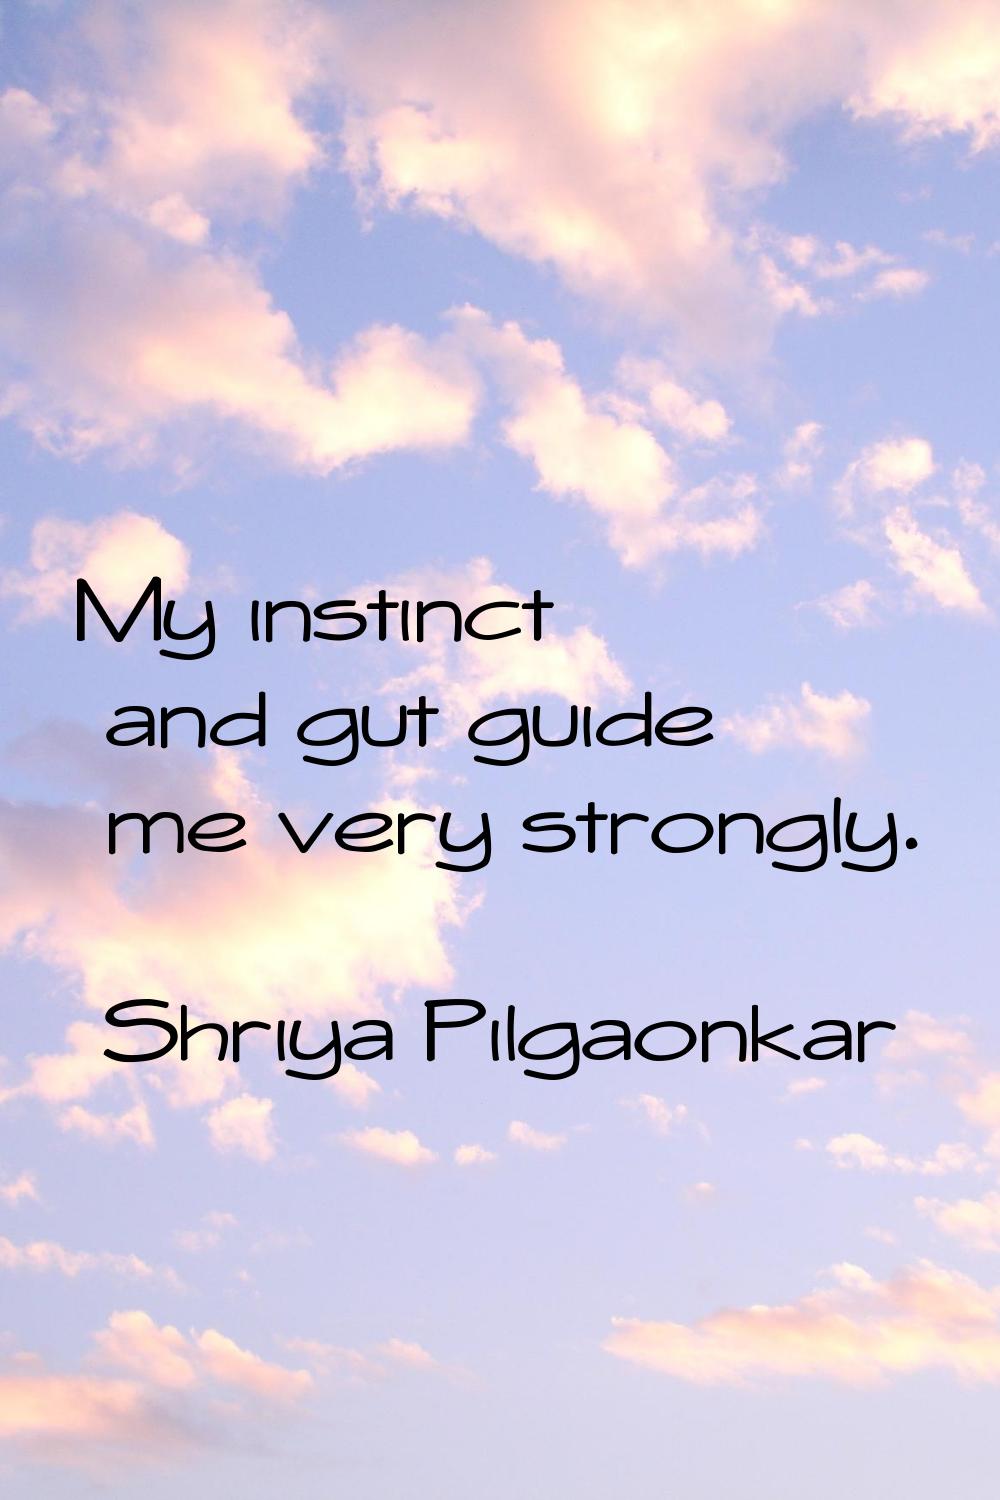 My instinct and gut guide me very strongly.